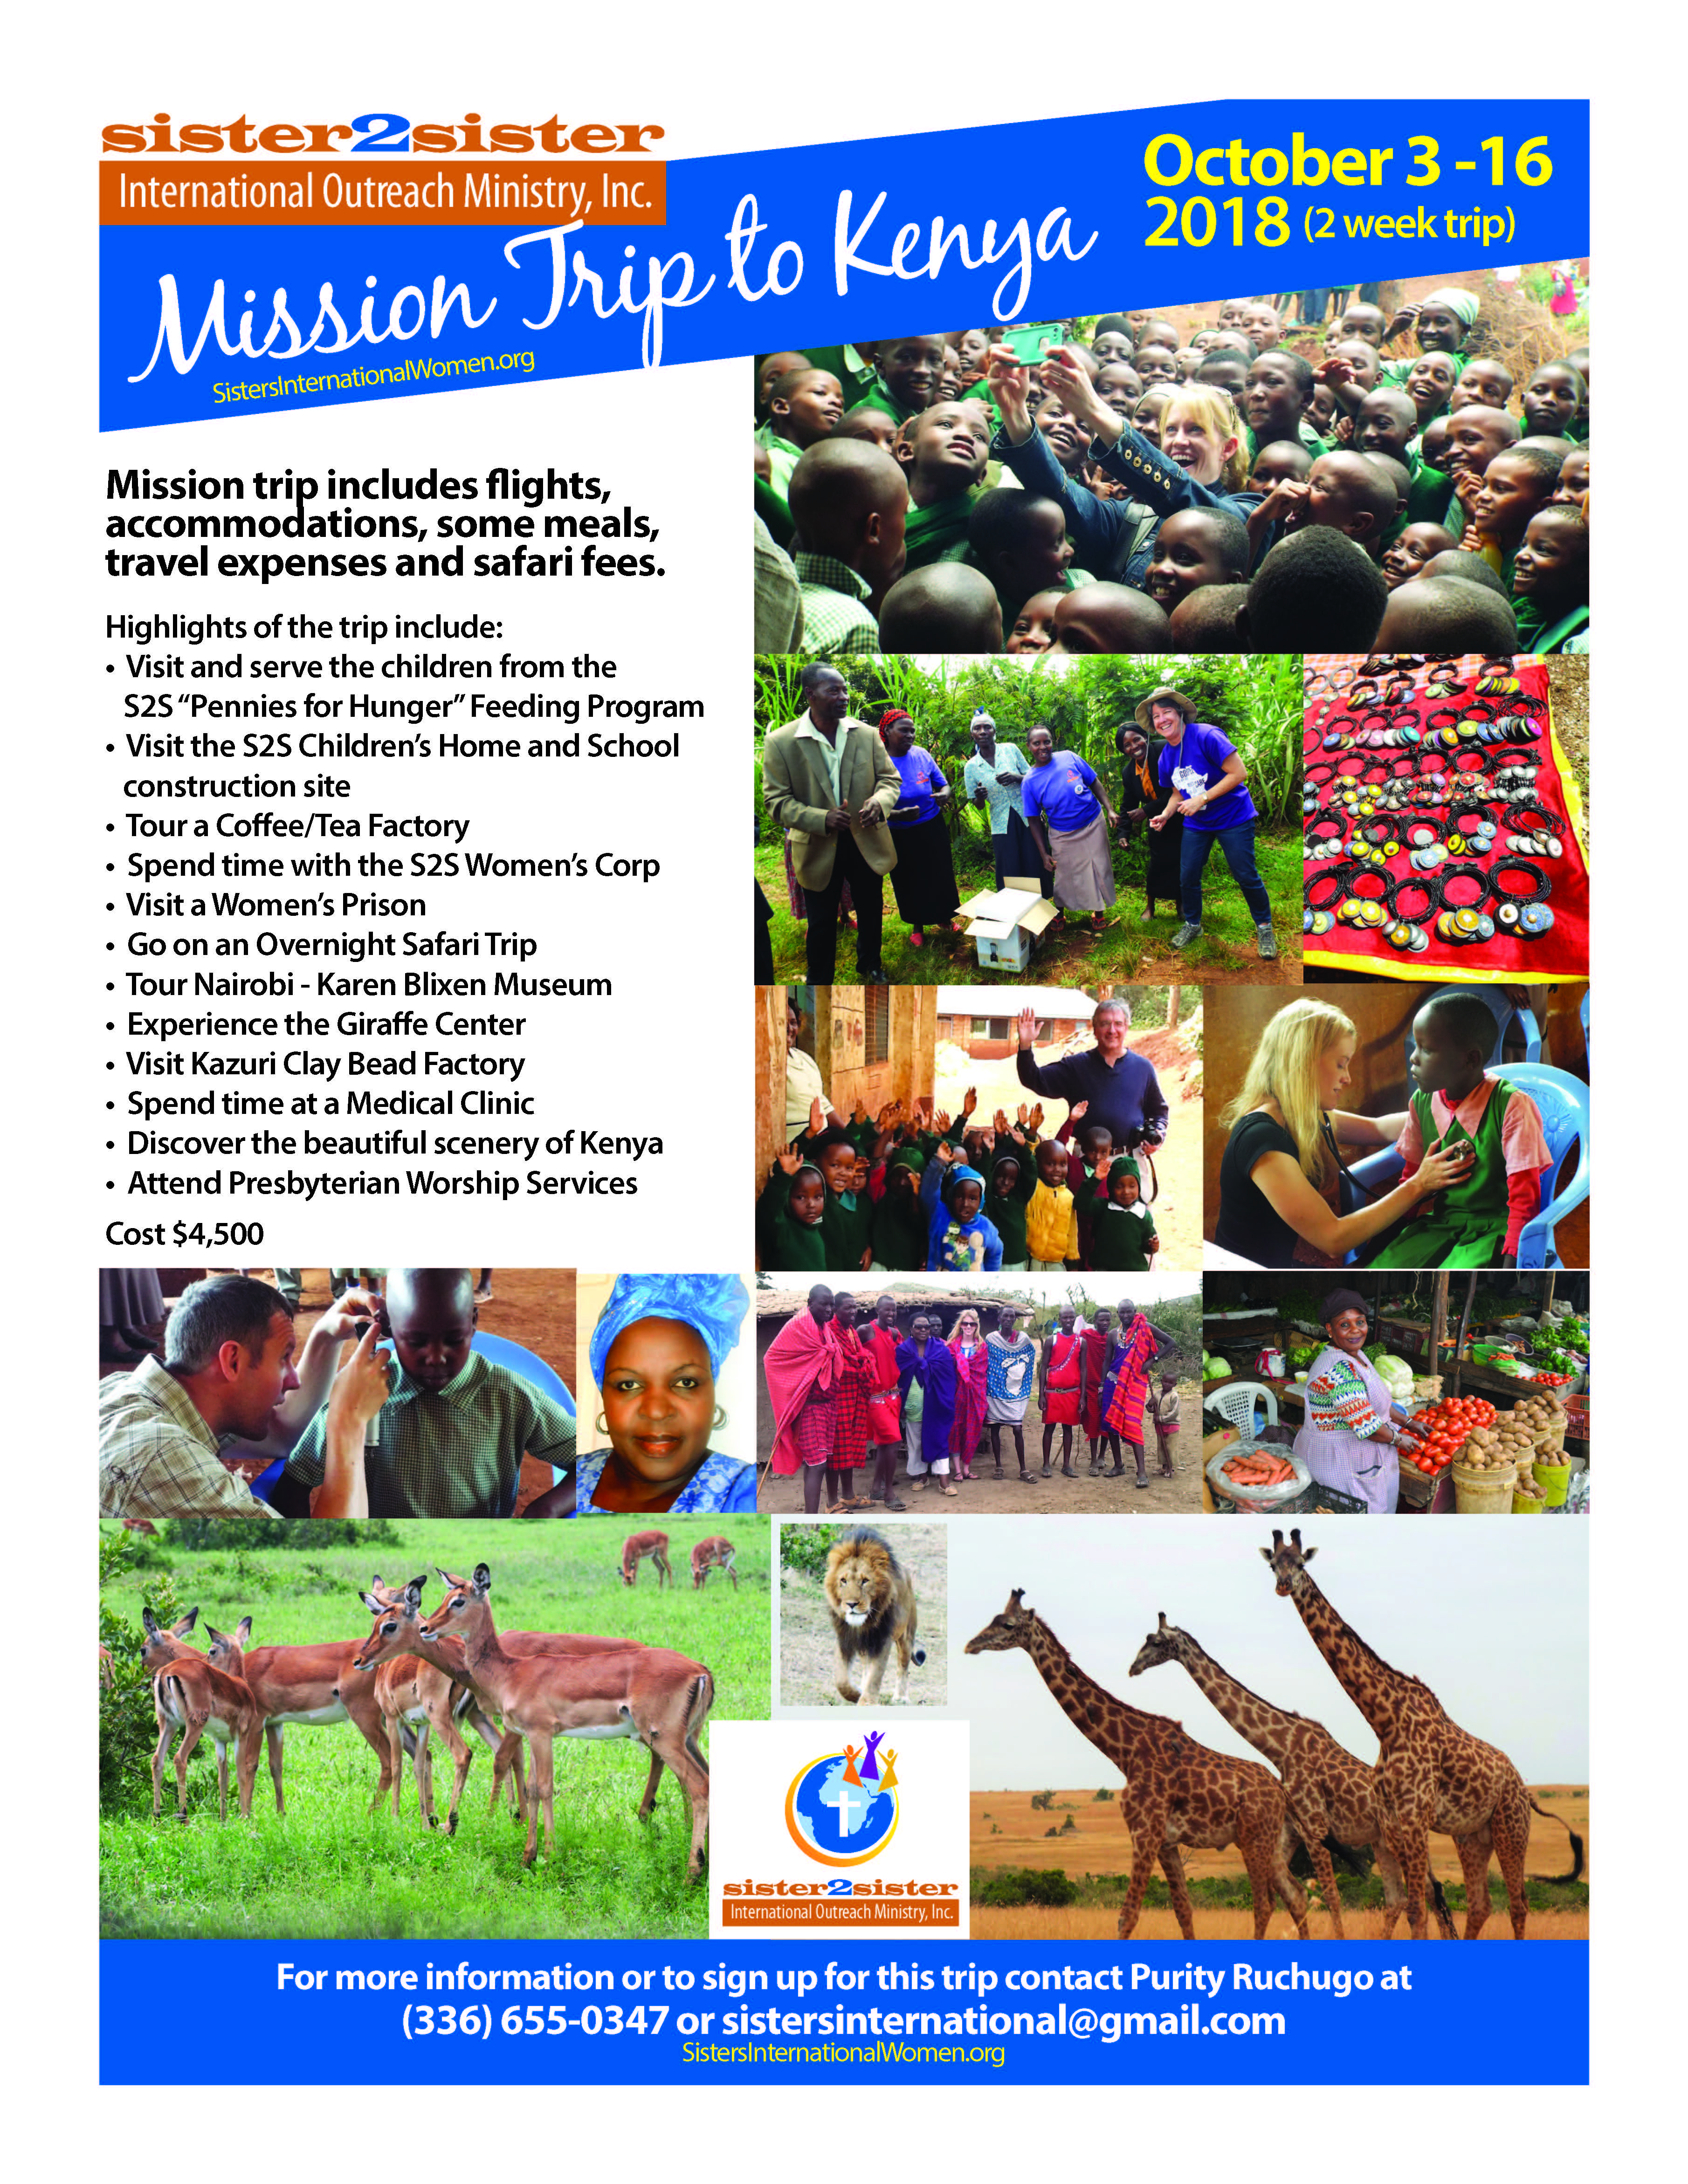 mission trip fundraising website